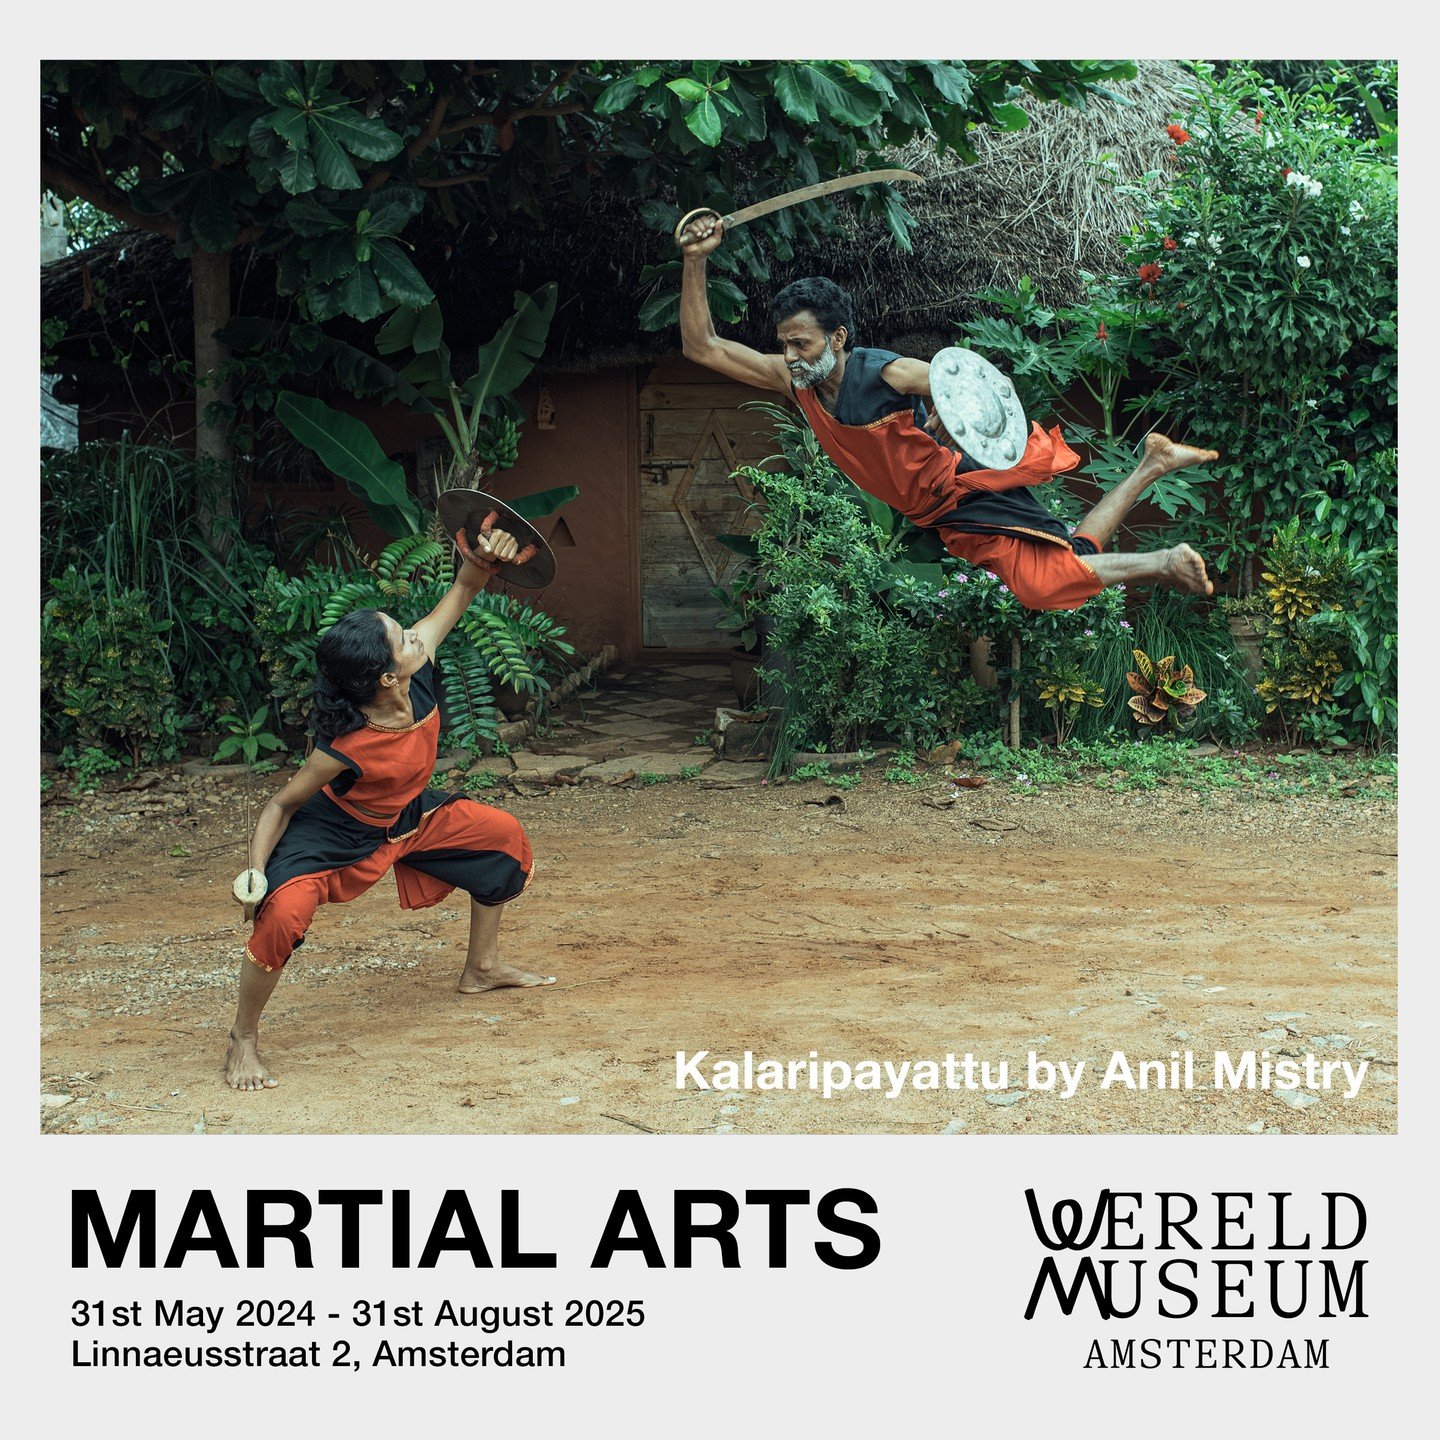 I'm very excited to announce that one of my photographs will be exhibited at @wereldmuseum.amsterdam The World Museum's ambitious Martial Arts exhibition starting this May. The photograph features a master of the ancient Keralan martial art Kalaripay